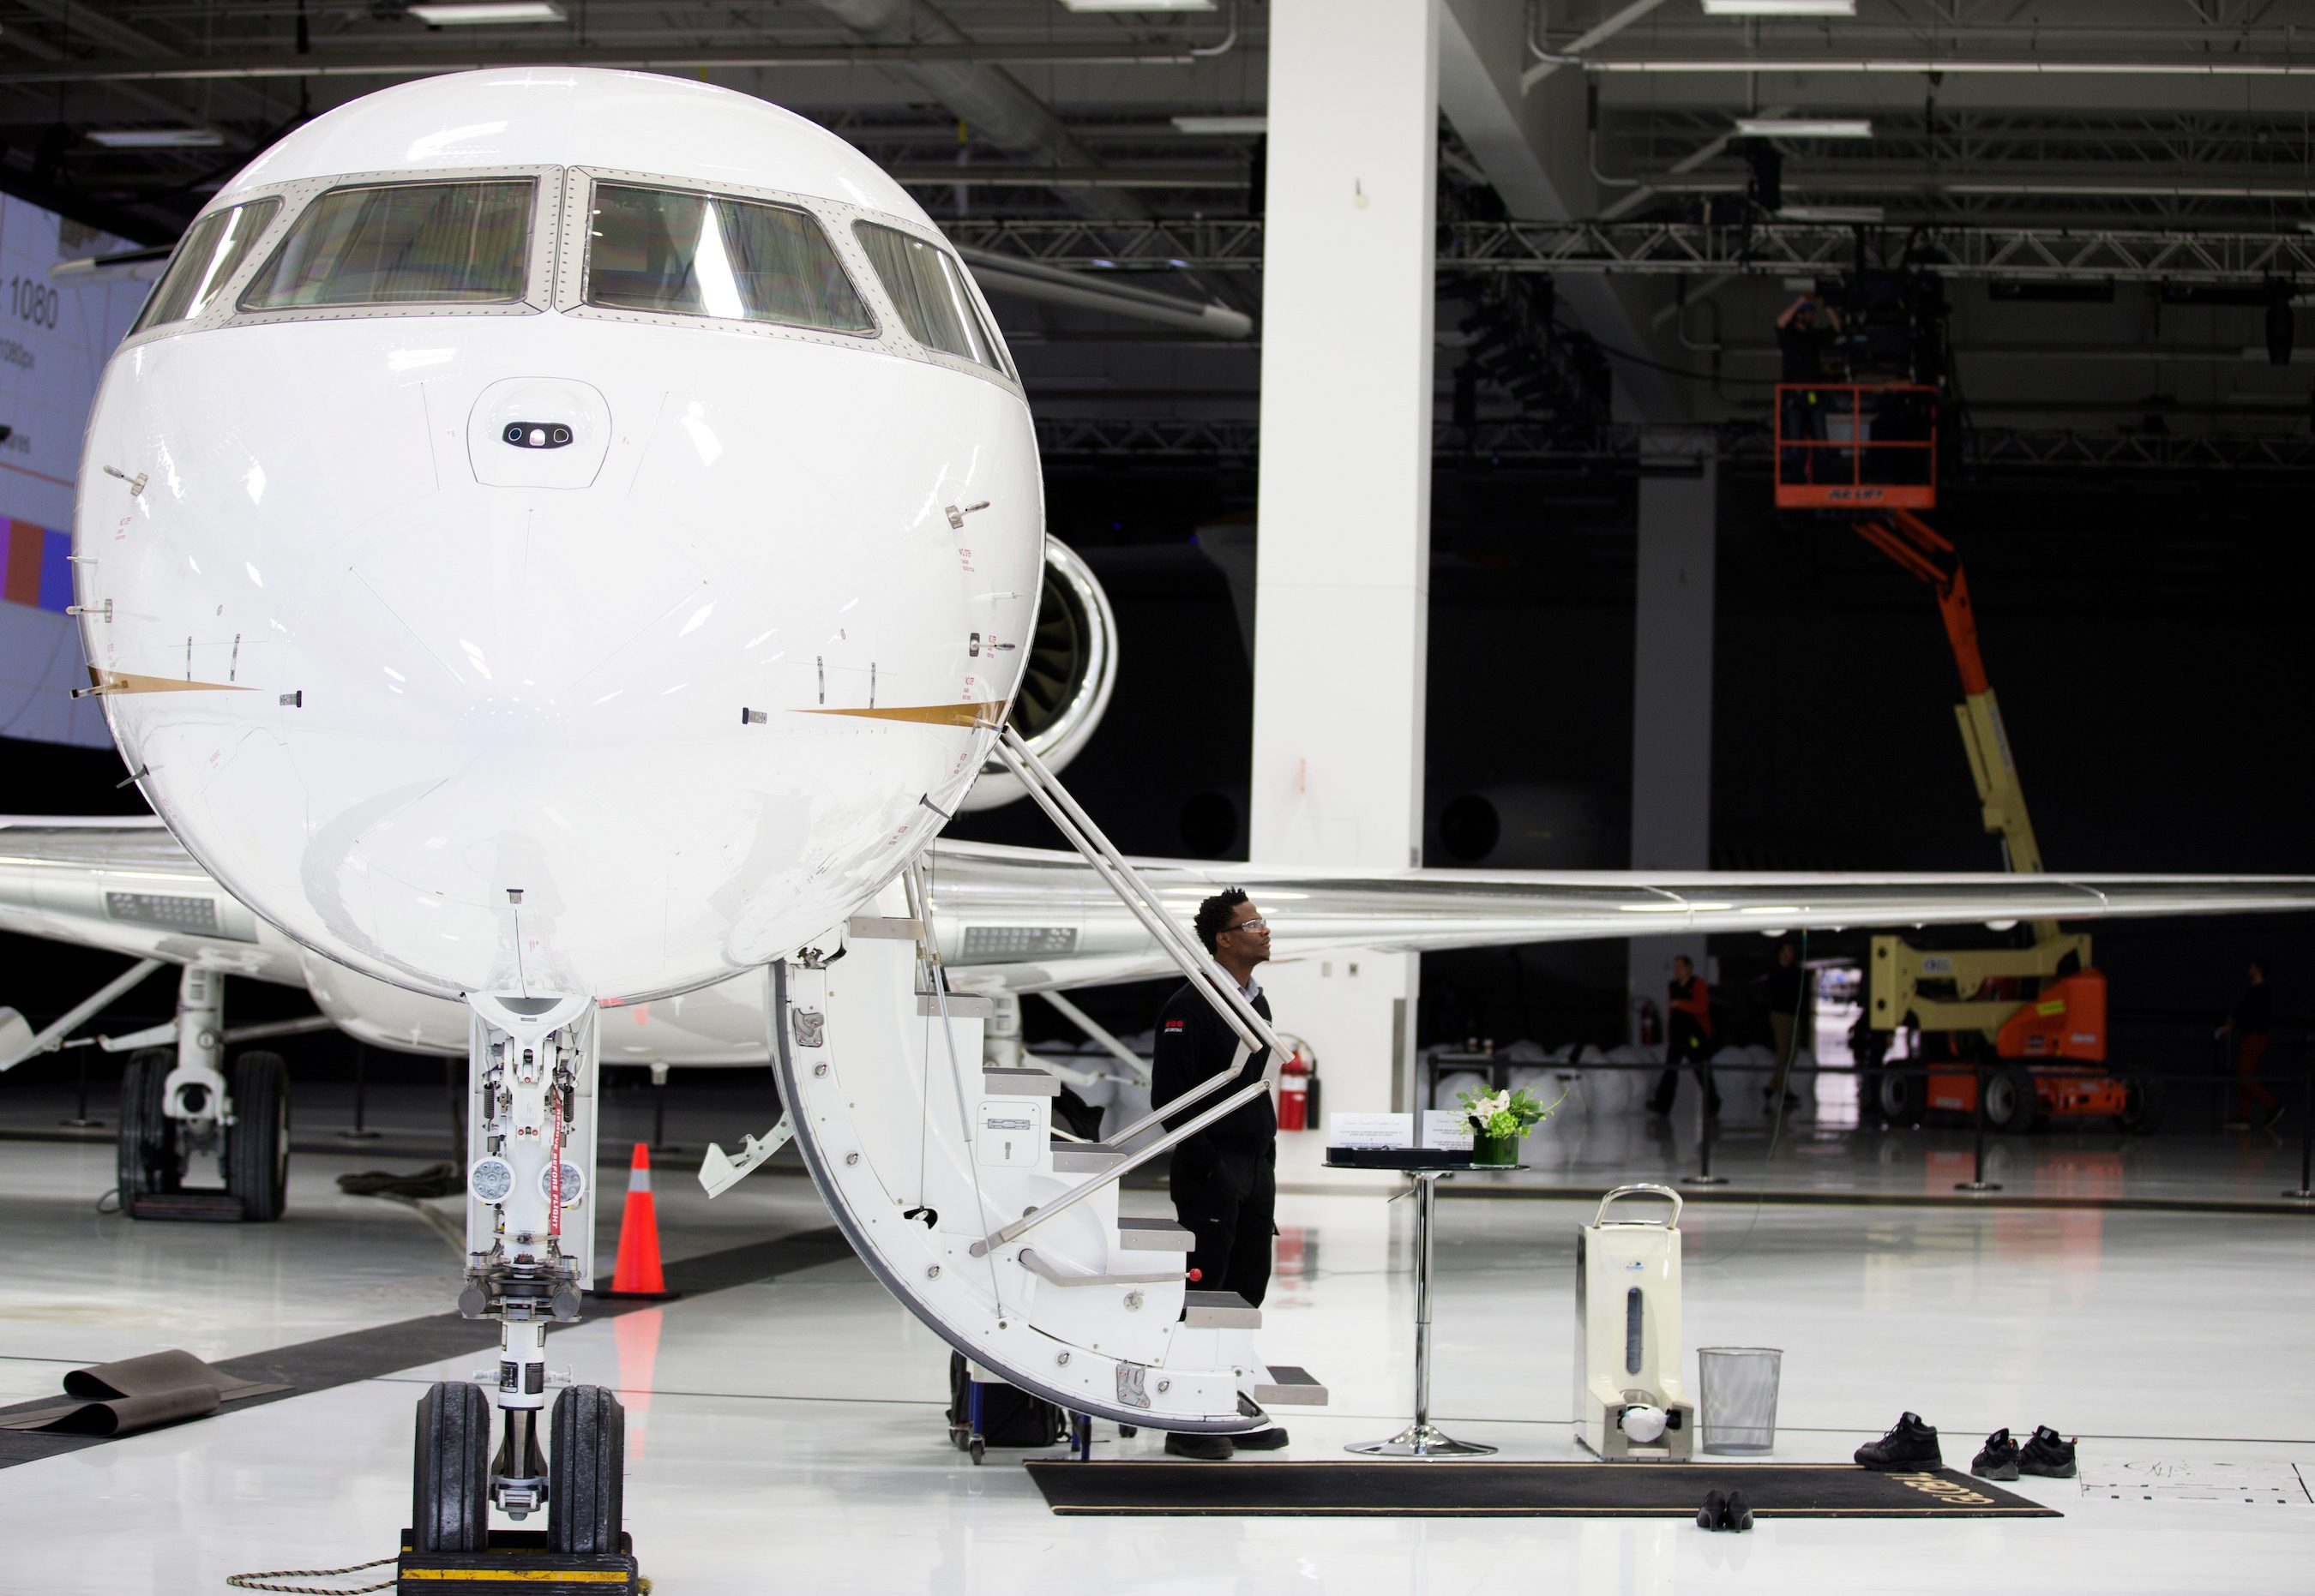 Bombardier to lay off 1,600, halt Learjet production